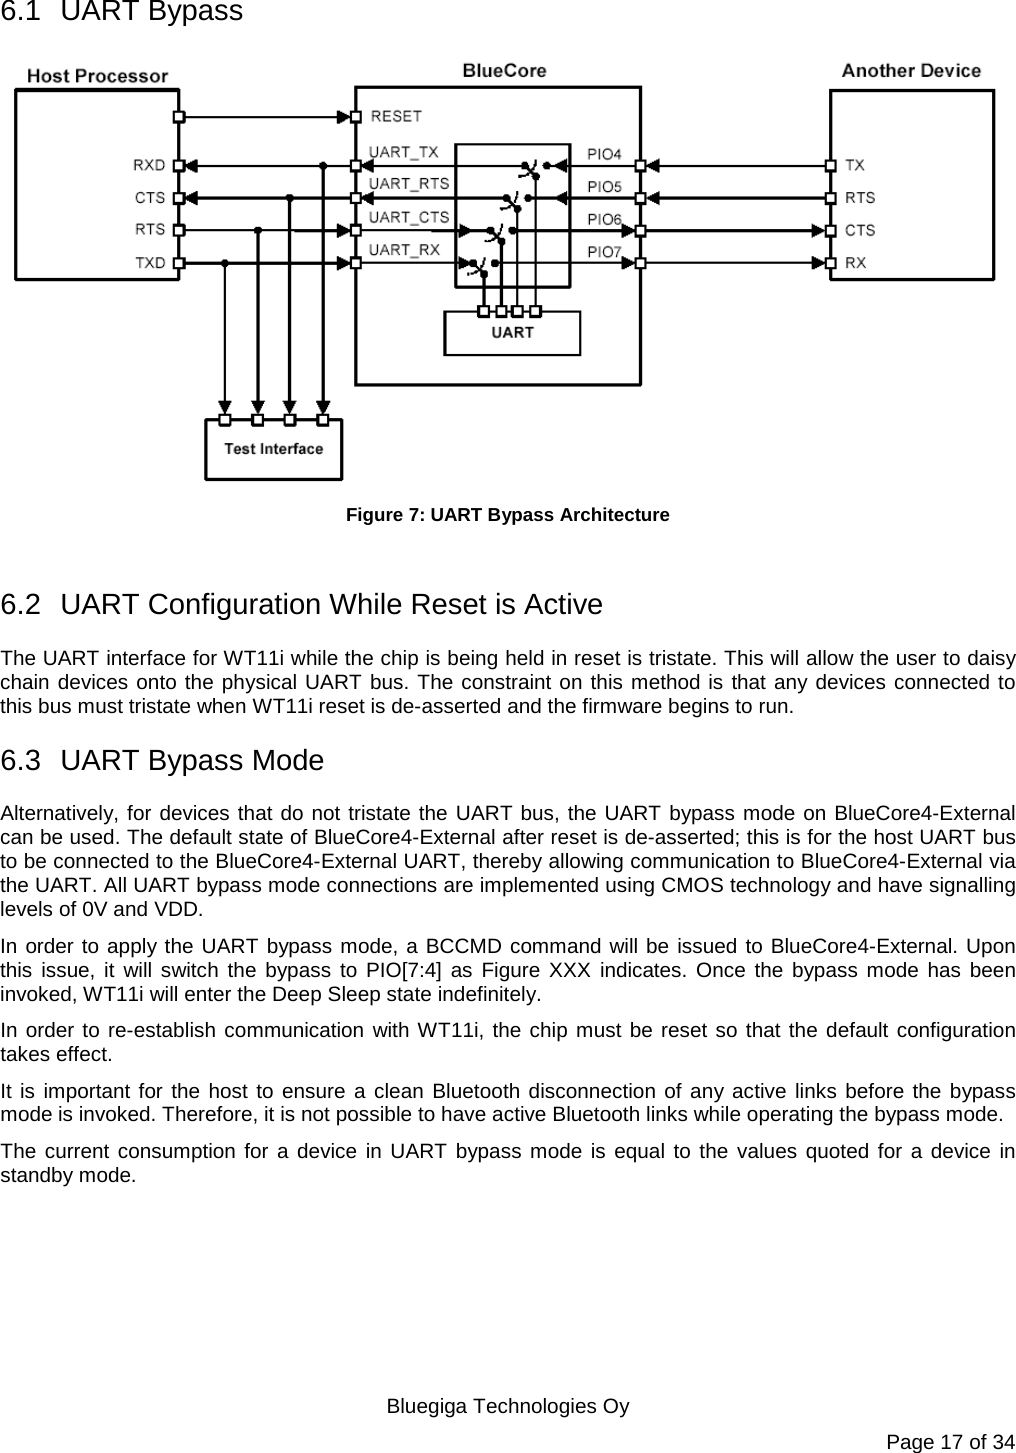   Bluegiga Technologies Oy Page 17 of 34 6.1 UART Bypass  Figure 7: UART Bypass Architecture  6.2 UART Configuration While Reset is Active The UART interface for WT11i while the chip is being held in reset is tristate. This will allow the user to daisy chain devices onto the physical UART bus. The constraint on this method is that any devices connected to this bus must tristate when WT11i reset is de-asserted and the firmware begins to run. 6.3 UART Bypass Mode Alternatively, for devices that do not tristate the UART bus, the UART bypass mode on BlueCore4-External can be used. The default state of BlueCore4-External after reset is de-asserted; this is for the host UART bus to be connected to the BlueCore4-External UART, thereby allowing communication to BlueCore4-External via the UART. All UART bypass mode connections are implemented using CMOS technology and have signalling levels of 0V and VDD. In order to apply the UART bypass mode, a BCCMD command will be issued to BlueCore4-External. Upon this issue, it will switch the bypass to PIO[7:4] as Figure XXX indicates. Once the bypass mode has been invoked, WT11i will enter the Deep Sleep state indefinitely. In order to re-establish communication with WT11i, the chip must be reset so that the default configuration takes effect. It is important for the host to ensure a clean Bluetooth disconnection of any active links before the bypass mode is invoked. Therefore, it is not possible to have active Bluetooth links while operating the bypass mode. The current consumption for a device in UART bypass mode is equal to the values quoted for a device in standby mode. 